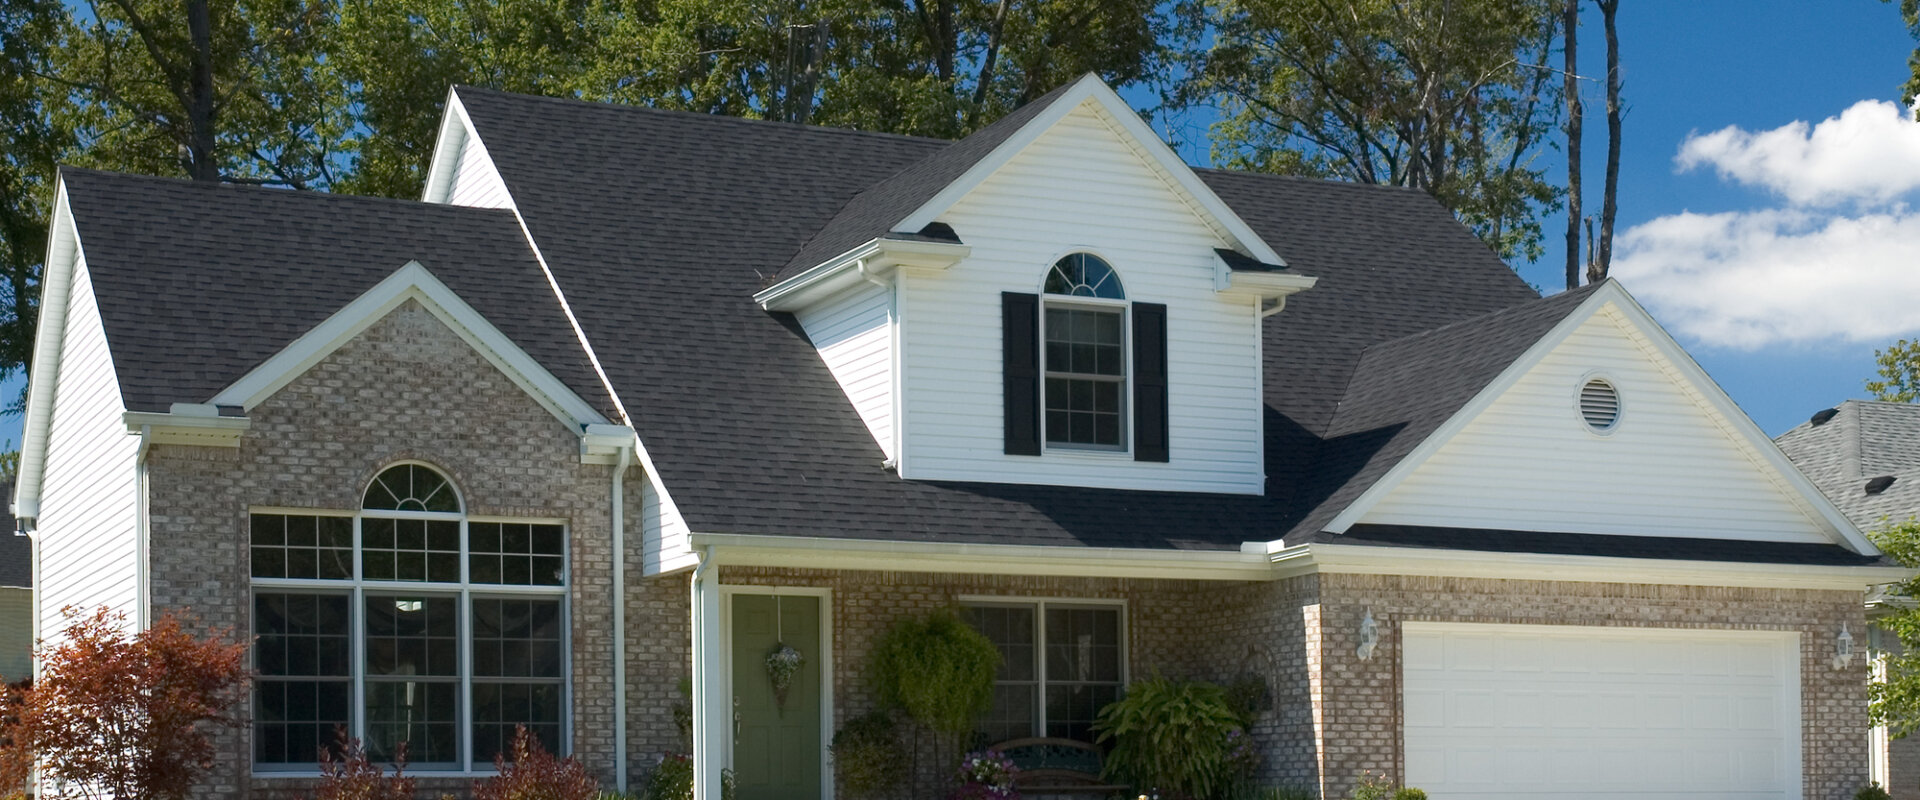 Sell Your House In Asheboro, NC